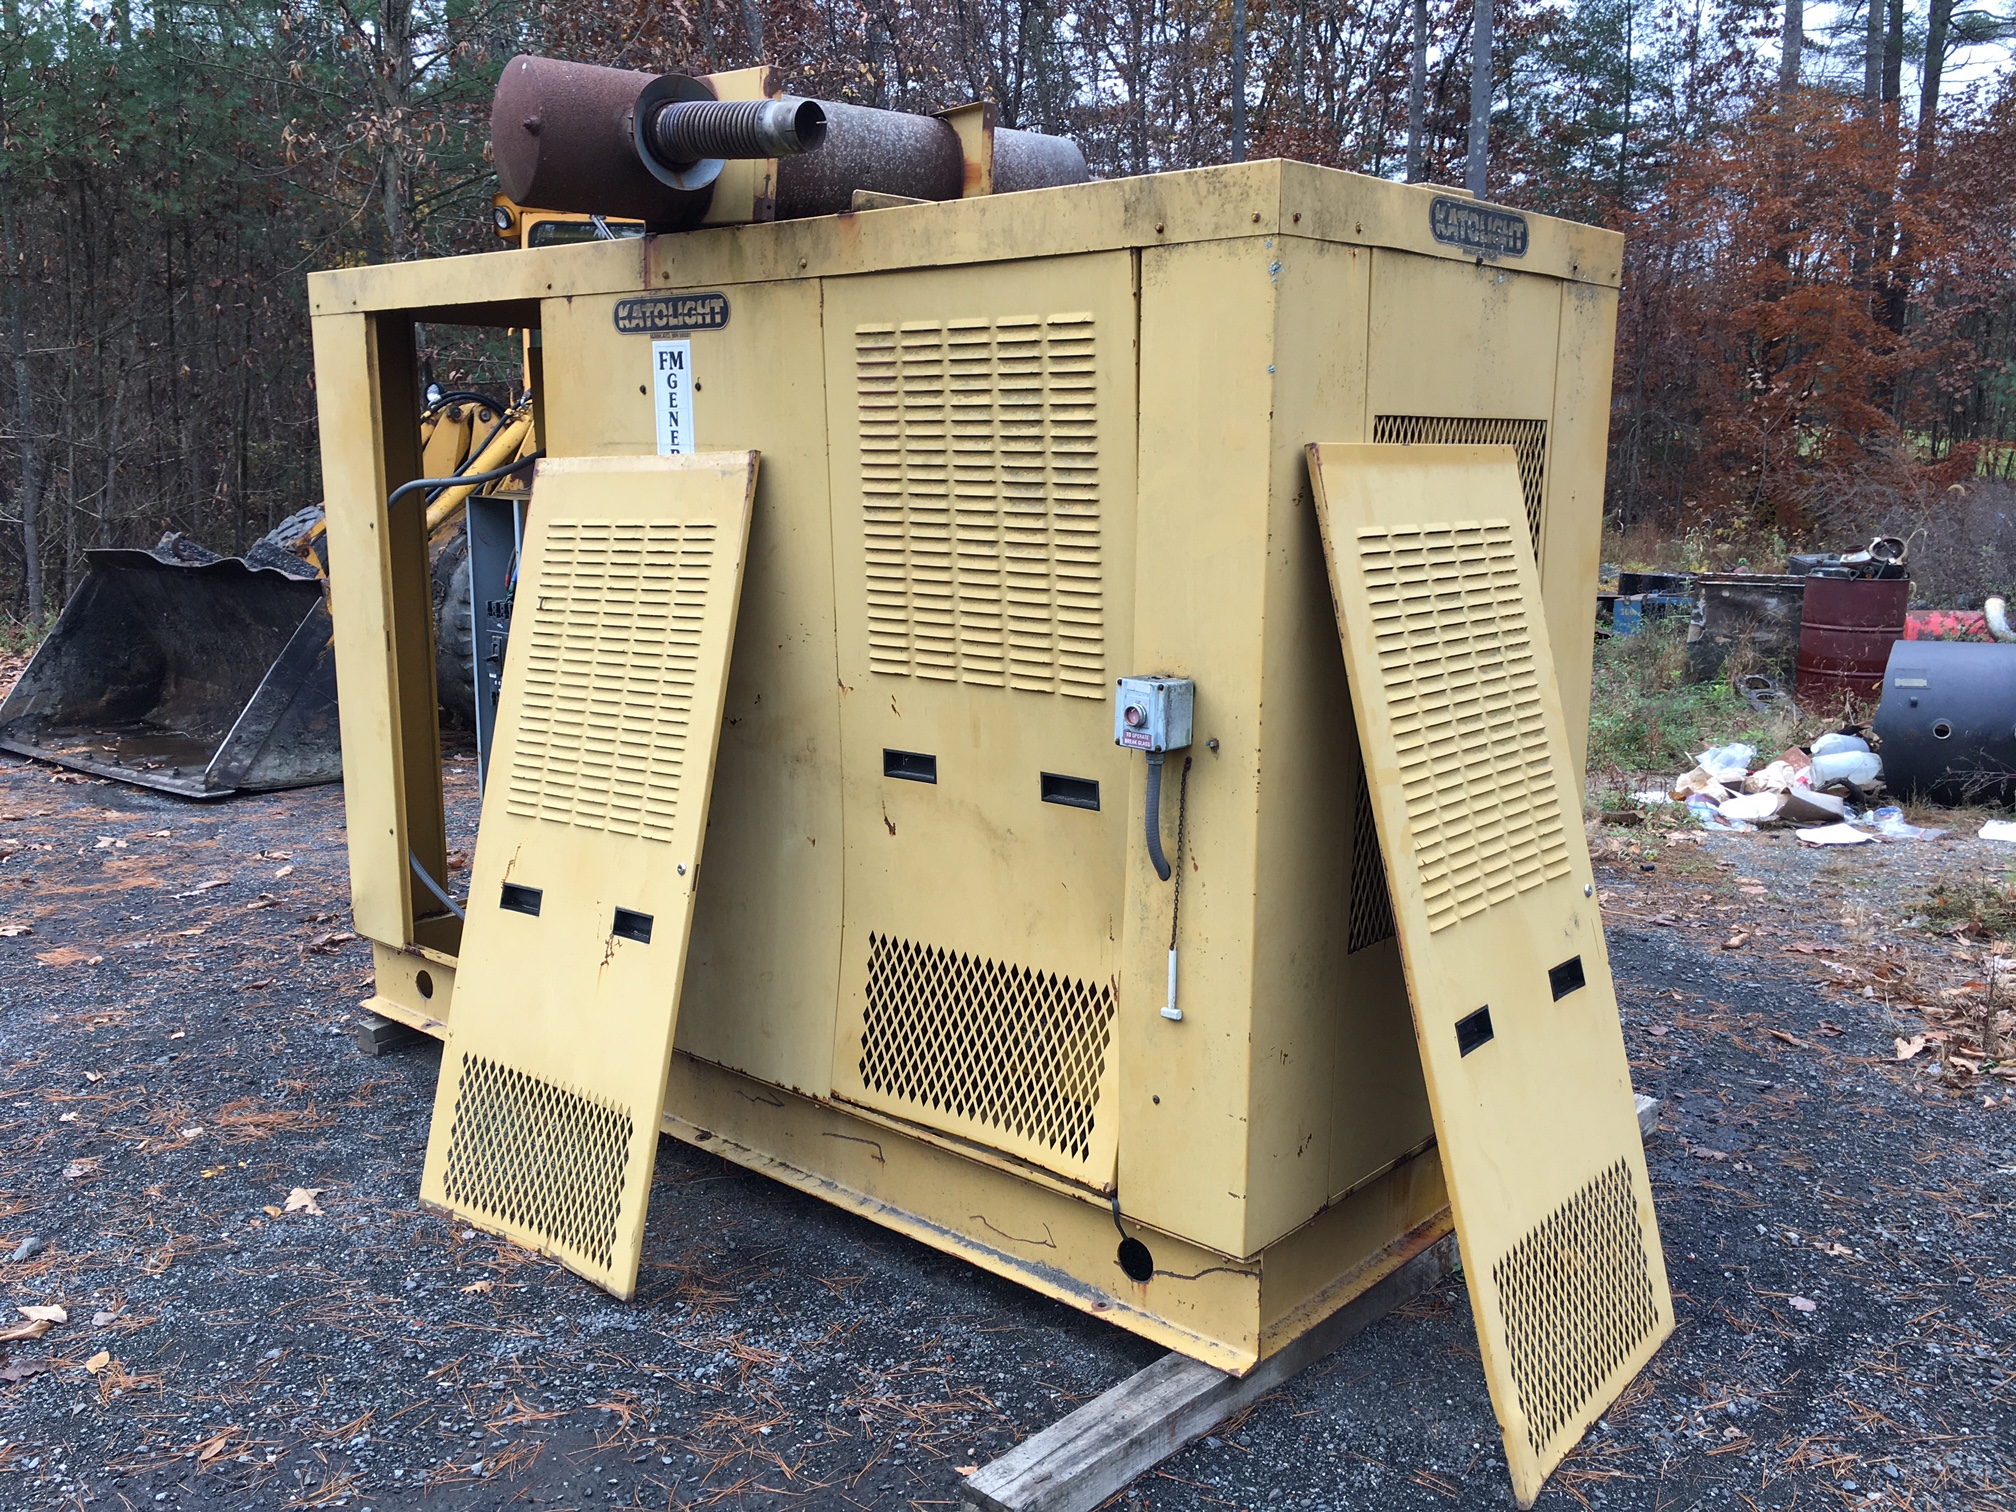 Katolight Genset Generator. Not currently running. Will need some work. The motor is a International DD466 turbo diesel with 210 hp. 125 kw. Will need to be all hooked up, maybe about 15 hours to hook and remount the motor and get it all running.